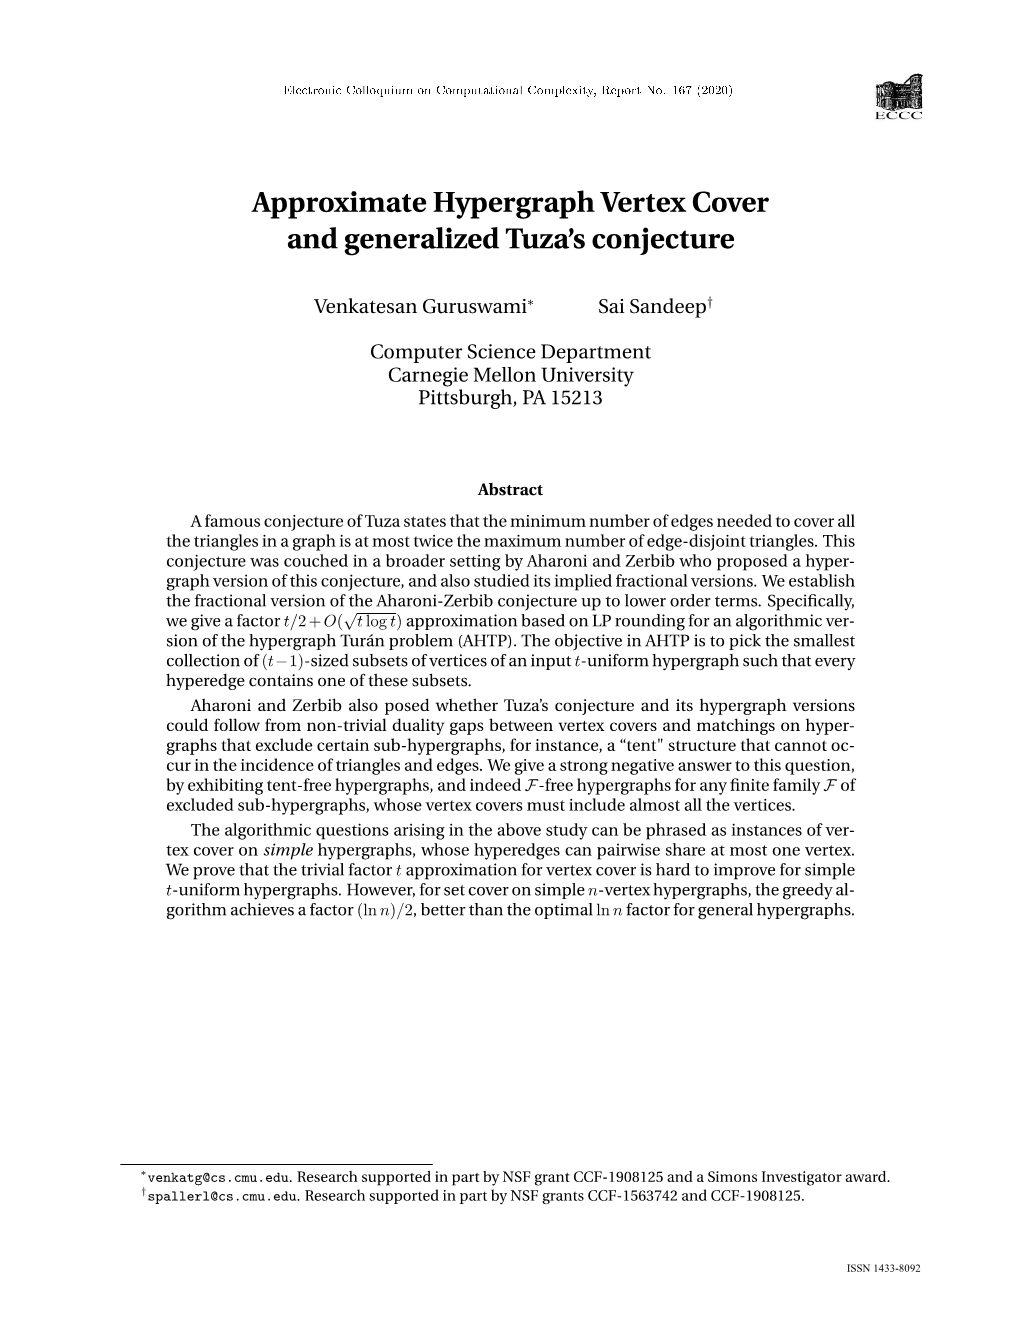 Approximate Hypergraph Vertex Cover and Generalized Tuza's